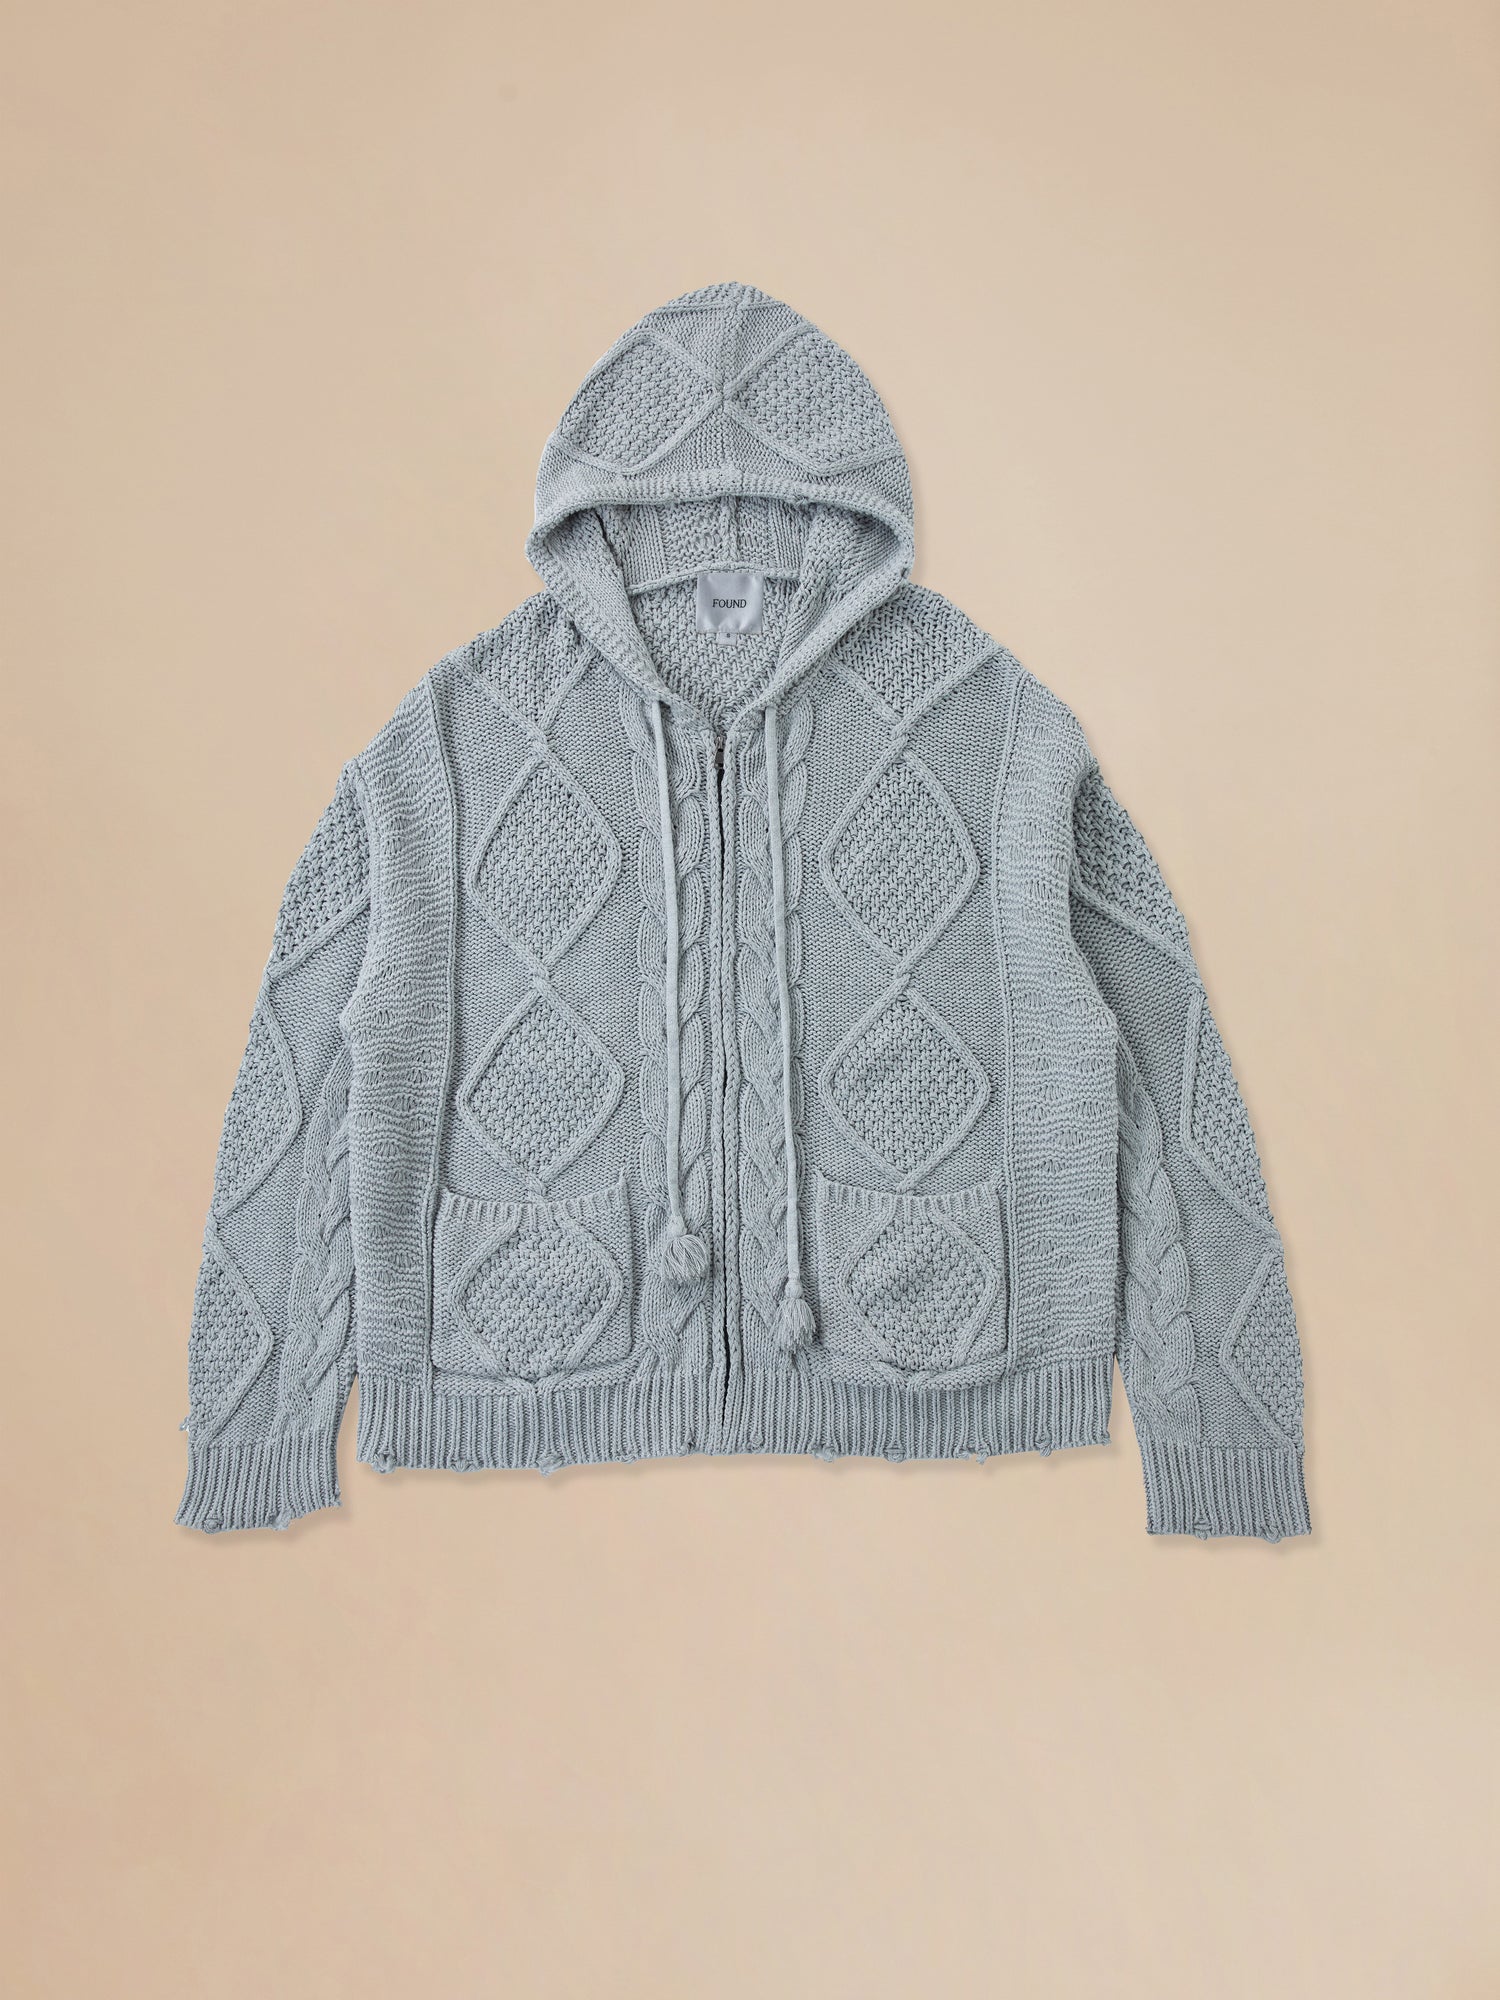 A cozy Zip Up Distressed Cable Knit Hoodie sweater in blue from Found.